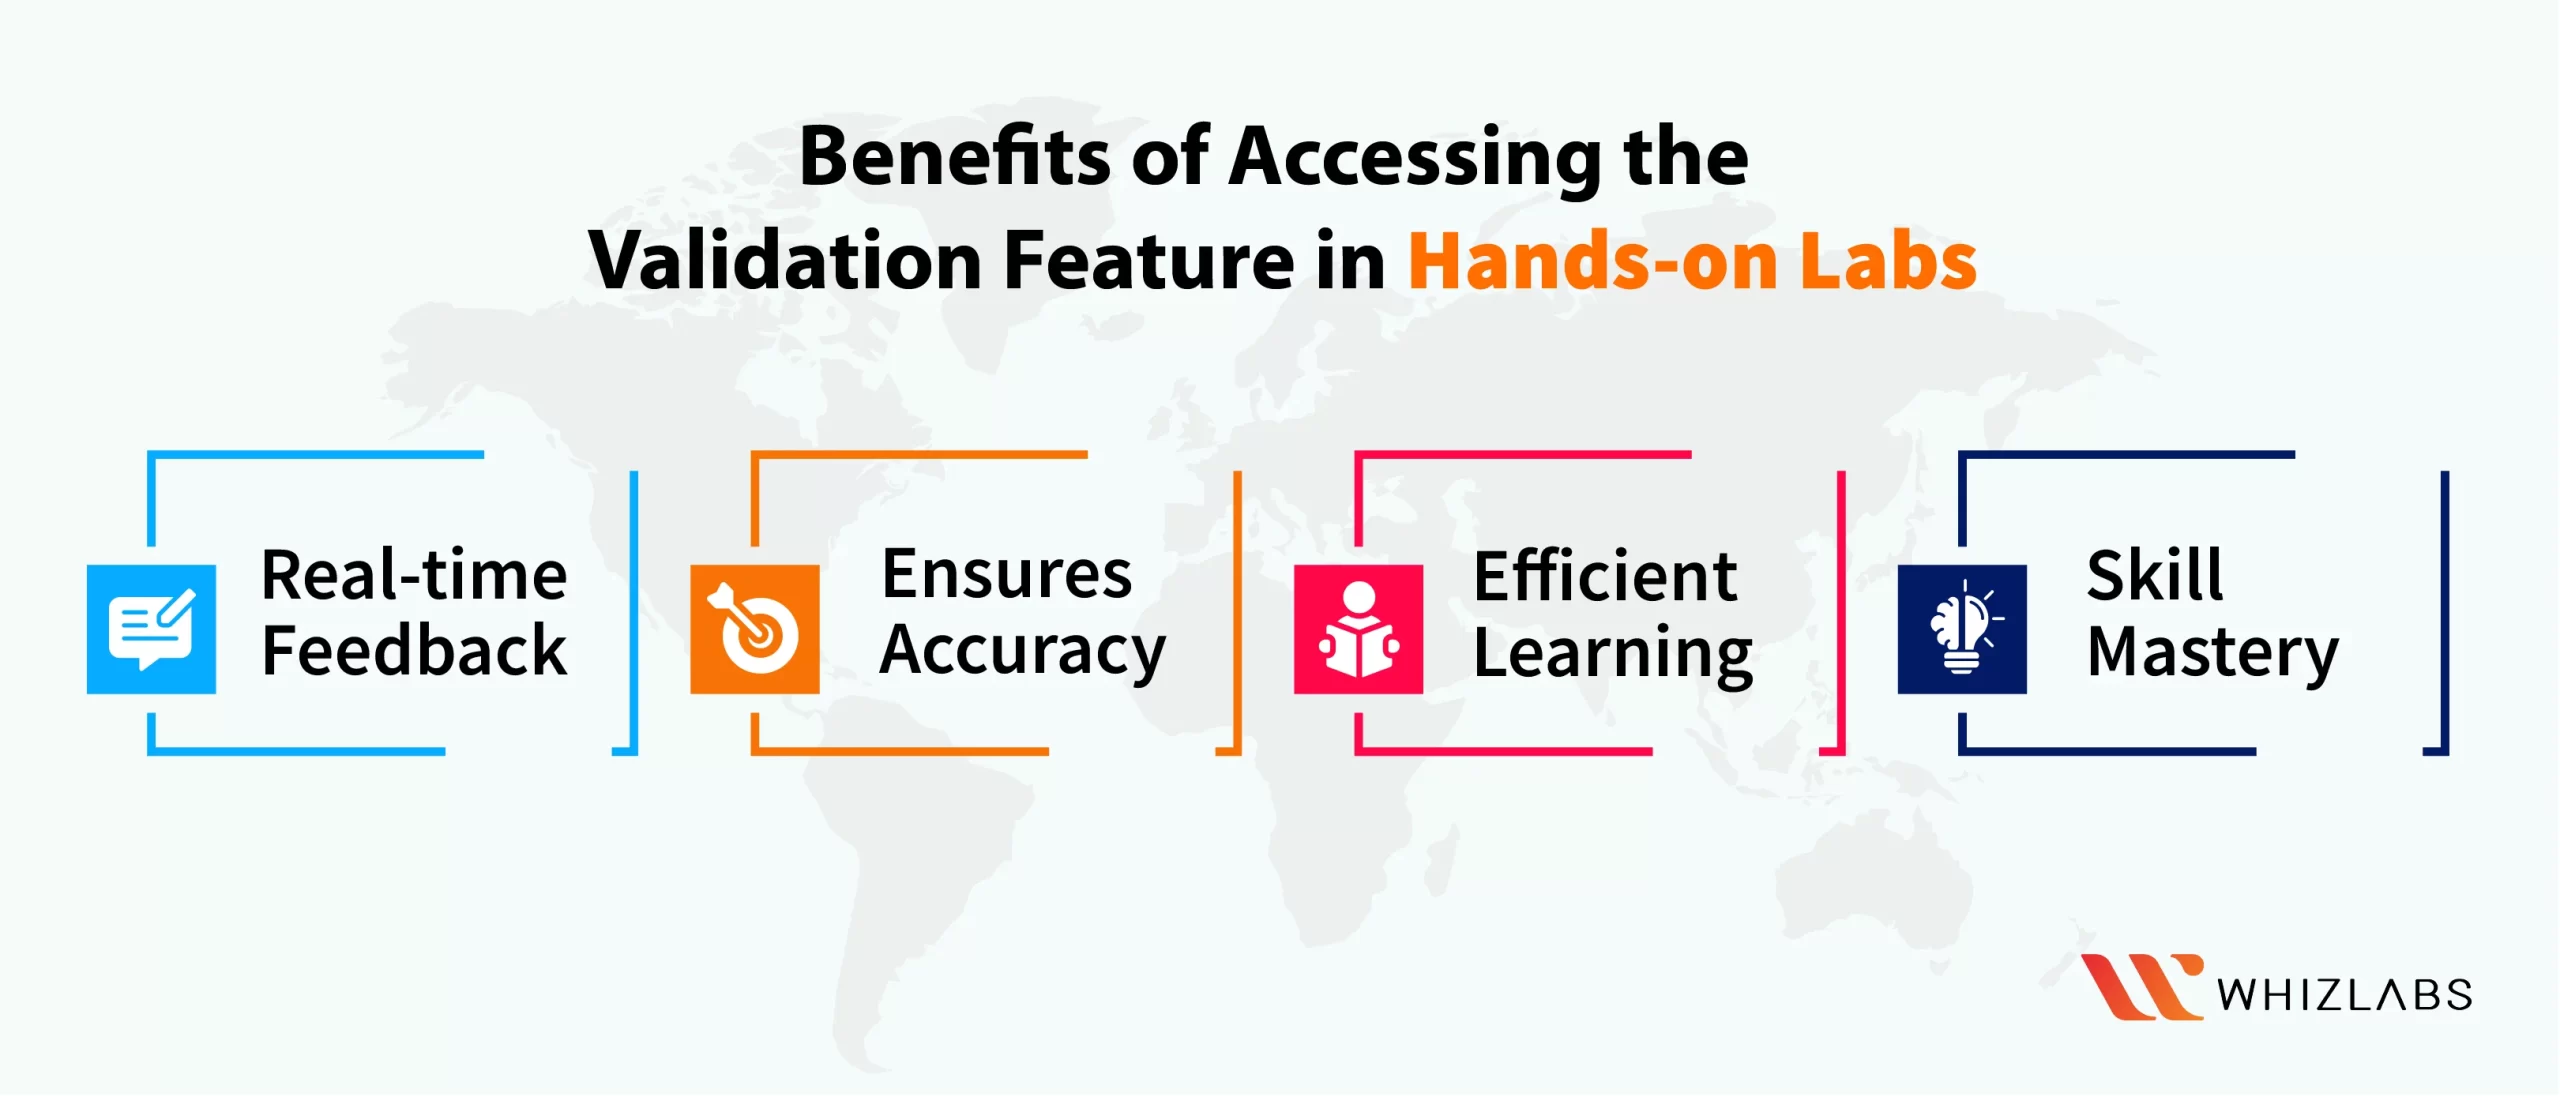 Benefits-of-accessing-the-Validation-feature-in-Hands-on-Labs